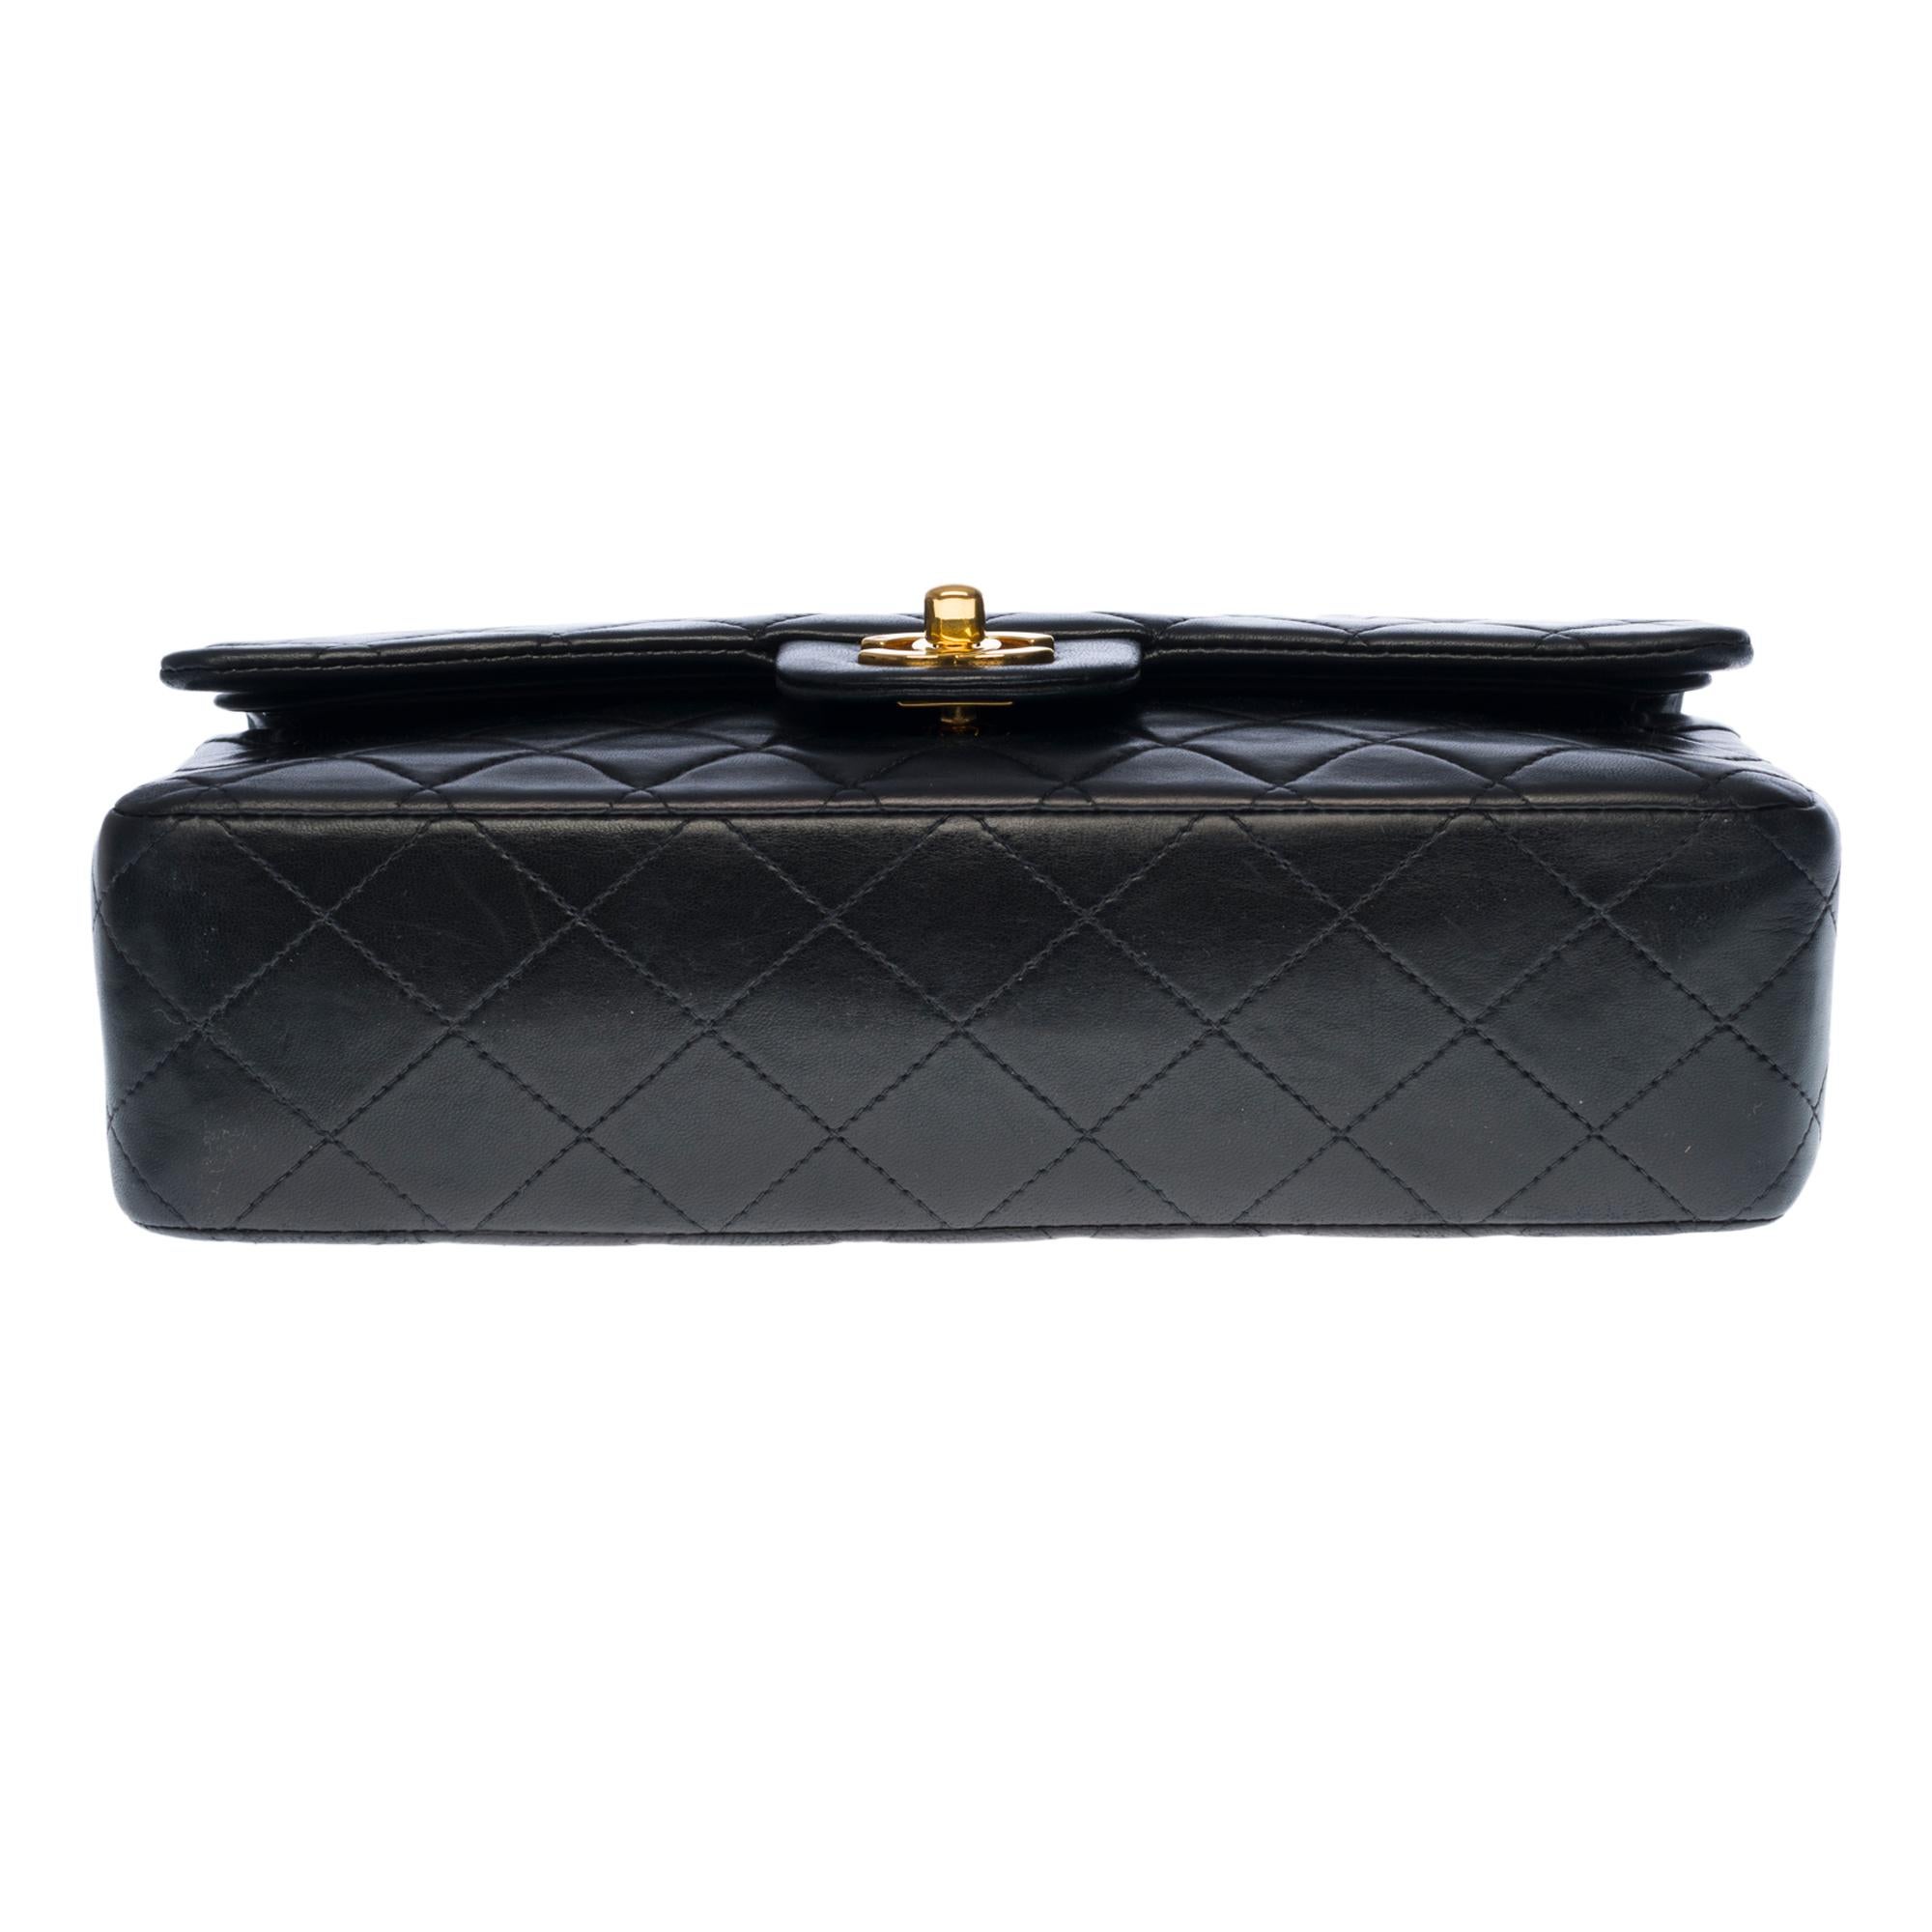 Chanel Timeless Medium double flap Shoulder bag in black quilted lambskin, GHW 4